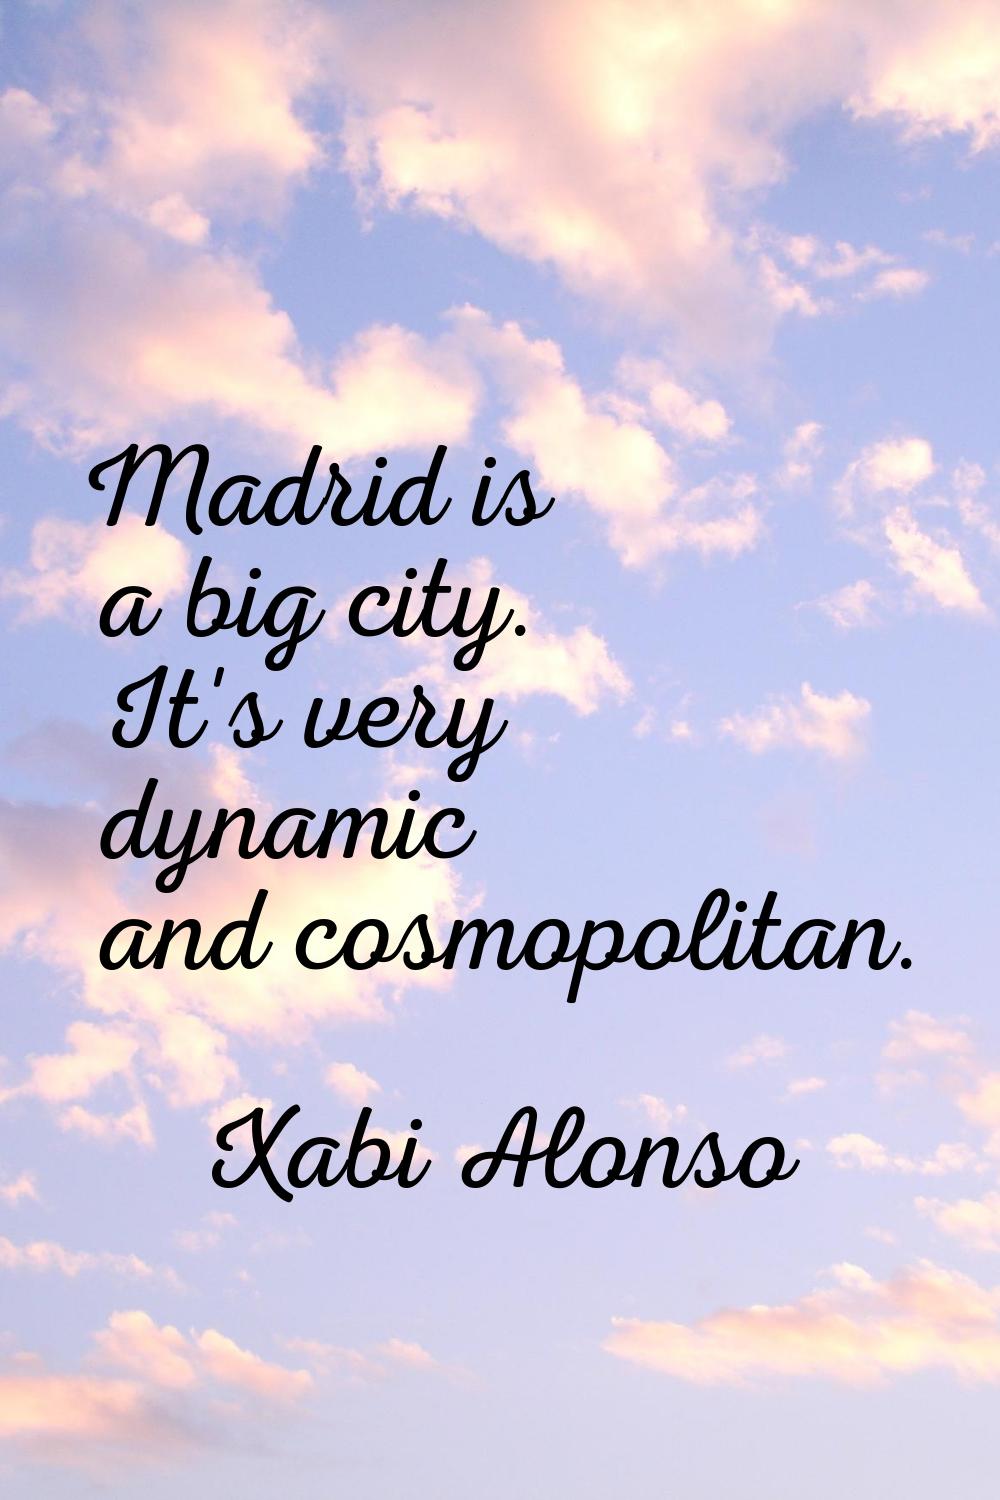 Madrid is a big city. It's very dynamic and cosmopolitan.